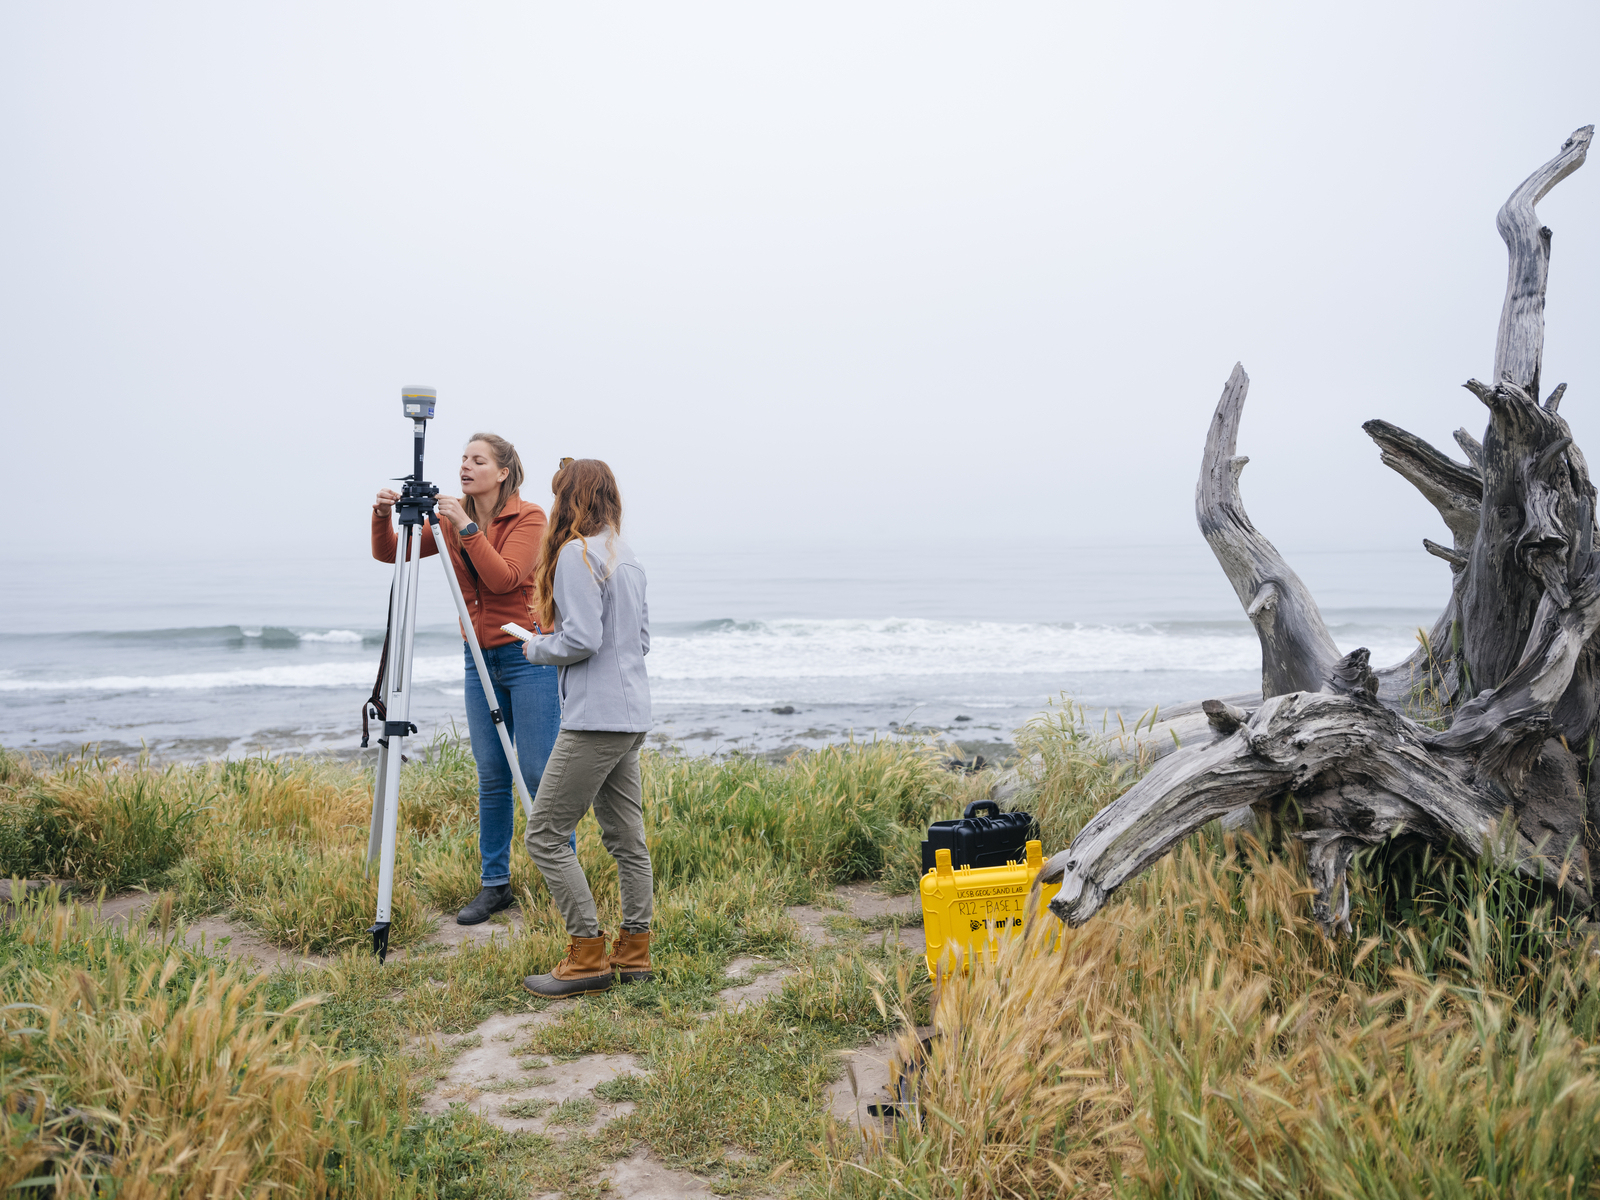 Two young women look into a small device on a tripod, which is set up on a grassy patch of land with breaking waves in the background.